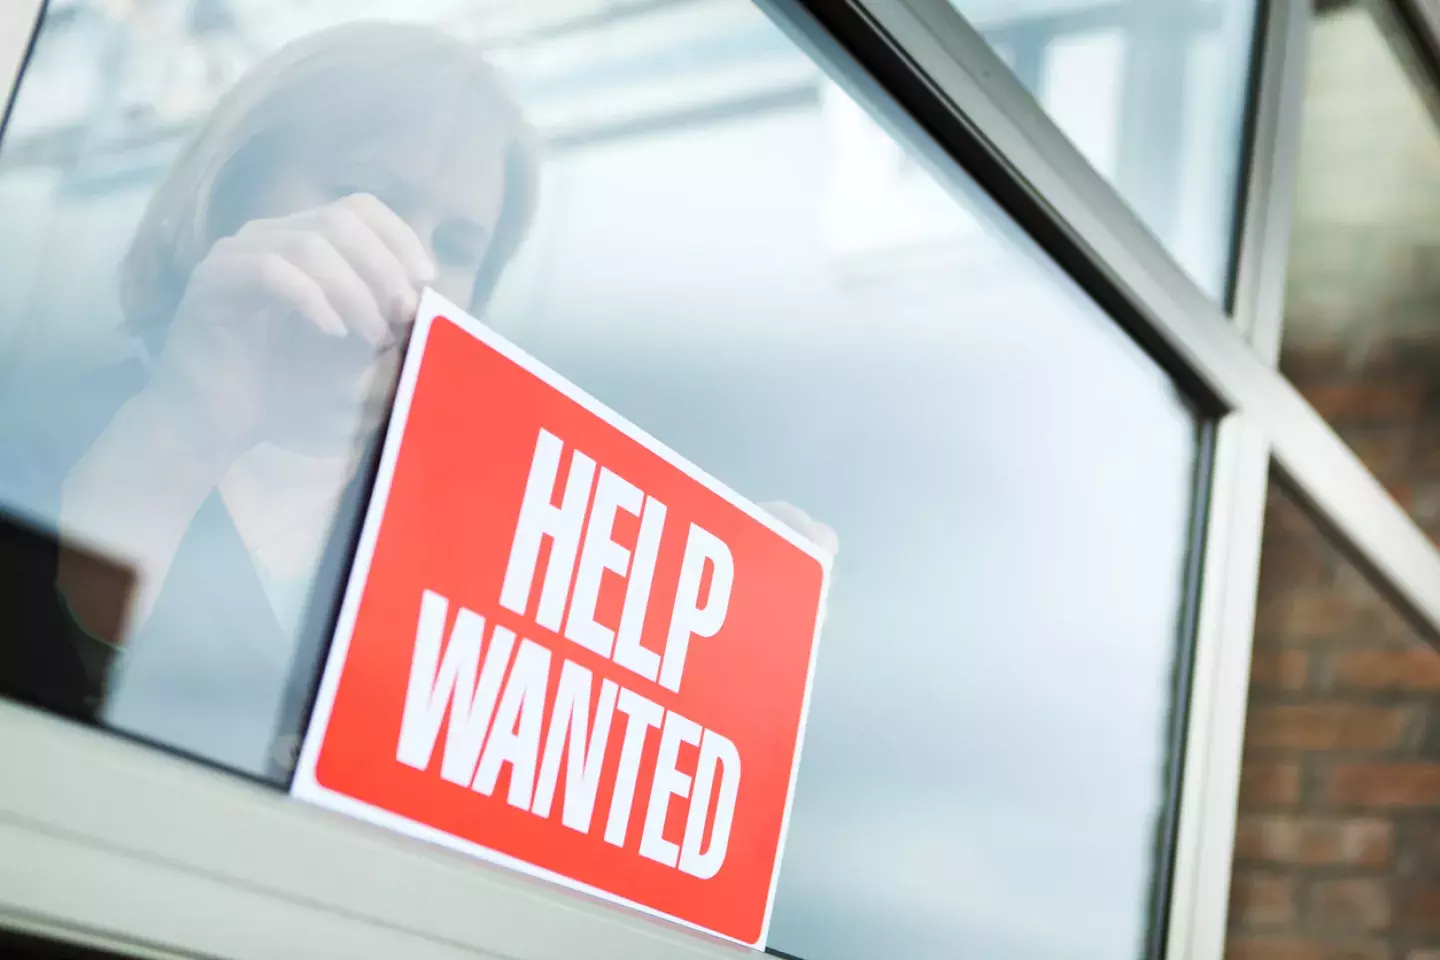 Woman in store putting out help wanted sign